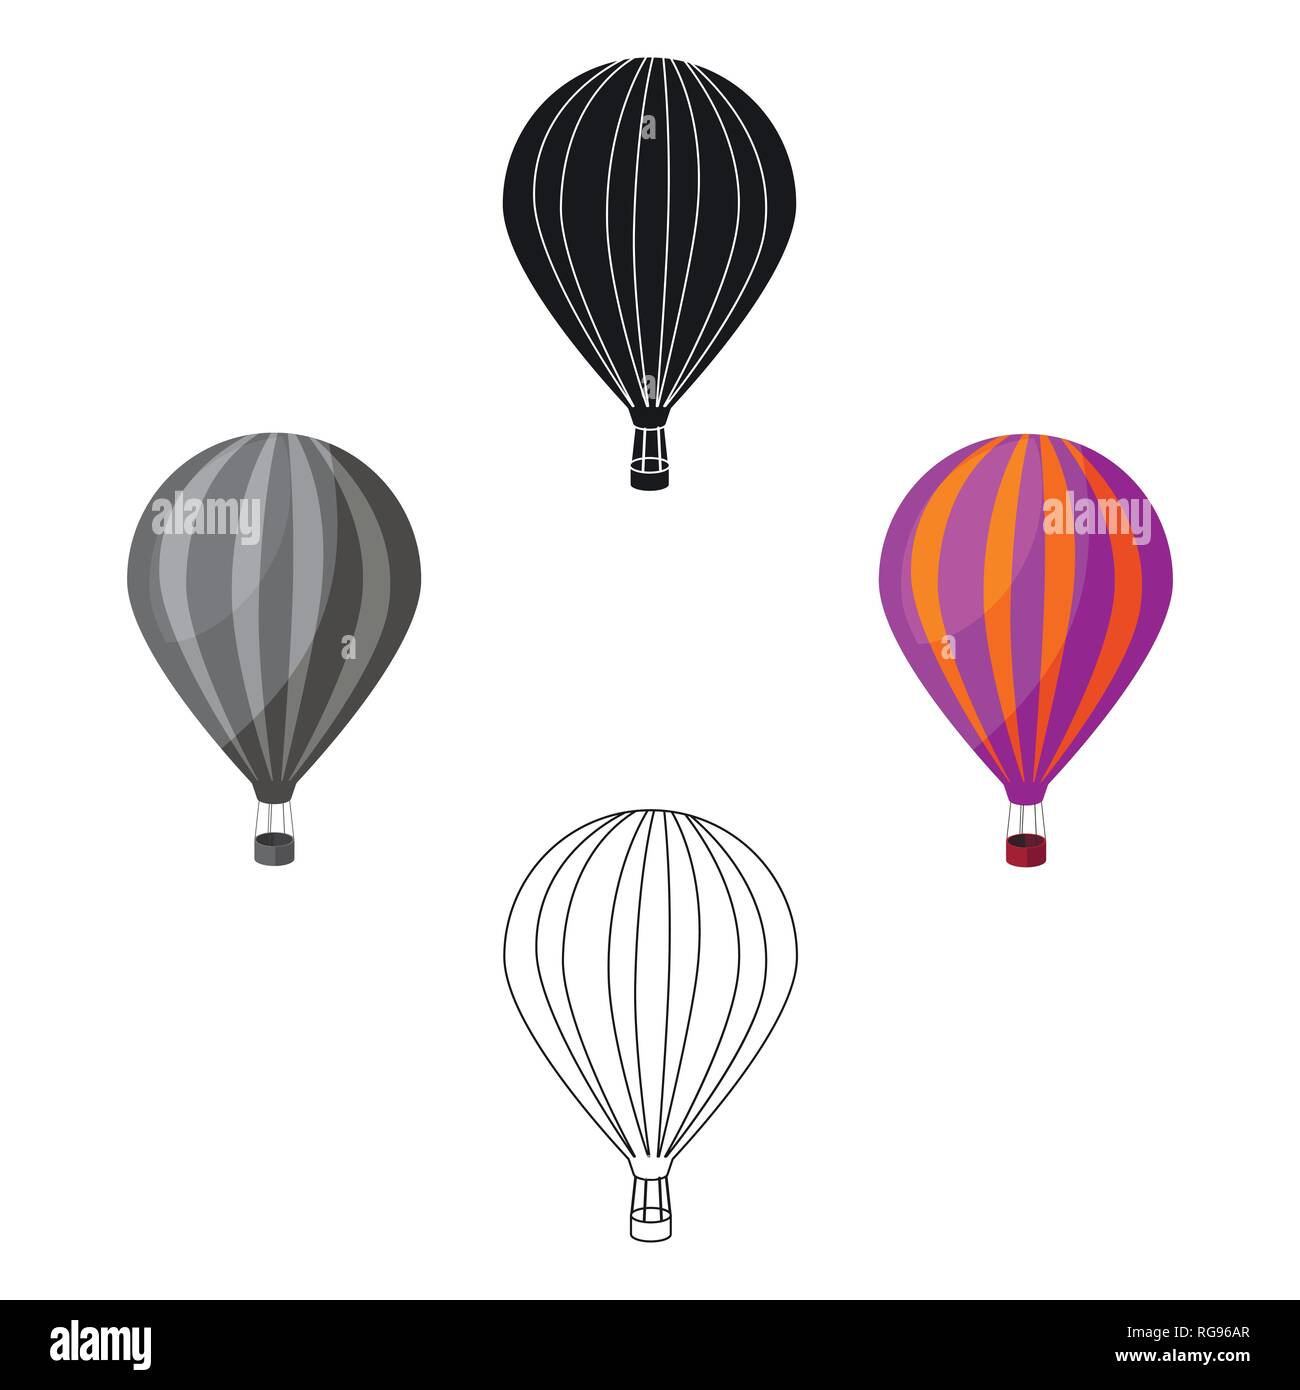 activities,adventure,aerial,aerostat,air,airbaloon,airship,airtrip,balloon,baloon,cartoon,cloud,design,designelement,flight,fly,glyph,hot,icon,illustration,isolated,logo,object,pictogram,pictograph,romantic,sign,single,sky,softblue,stock,style,symbol,transport,transportation,travel,traveling,vacation,vector,walking,warm,web,work Vector Vectors , Stock Vector